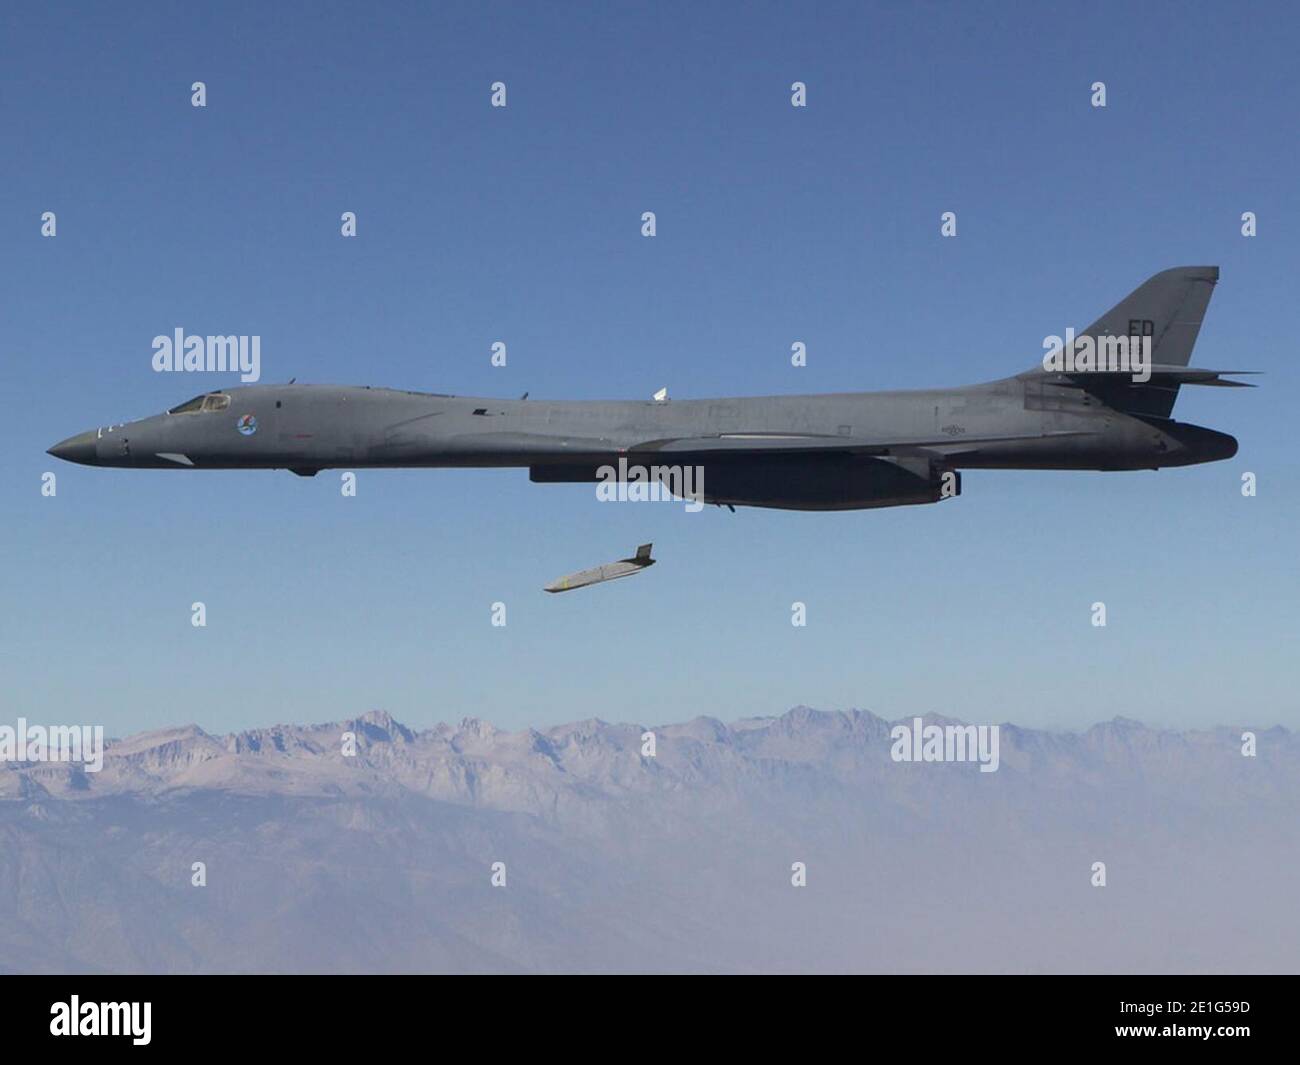 Long Range Anti-Ship Missile (LRASM) launches from an Air Force B-1B Lancer. Stock Photo